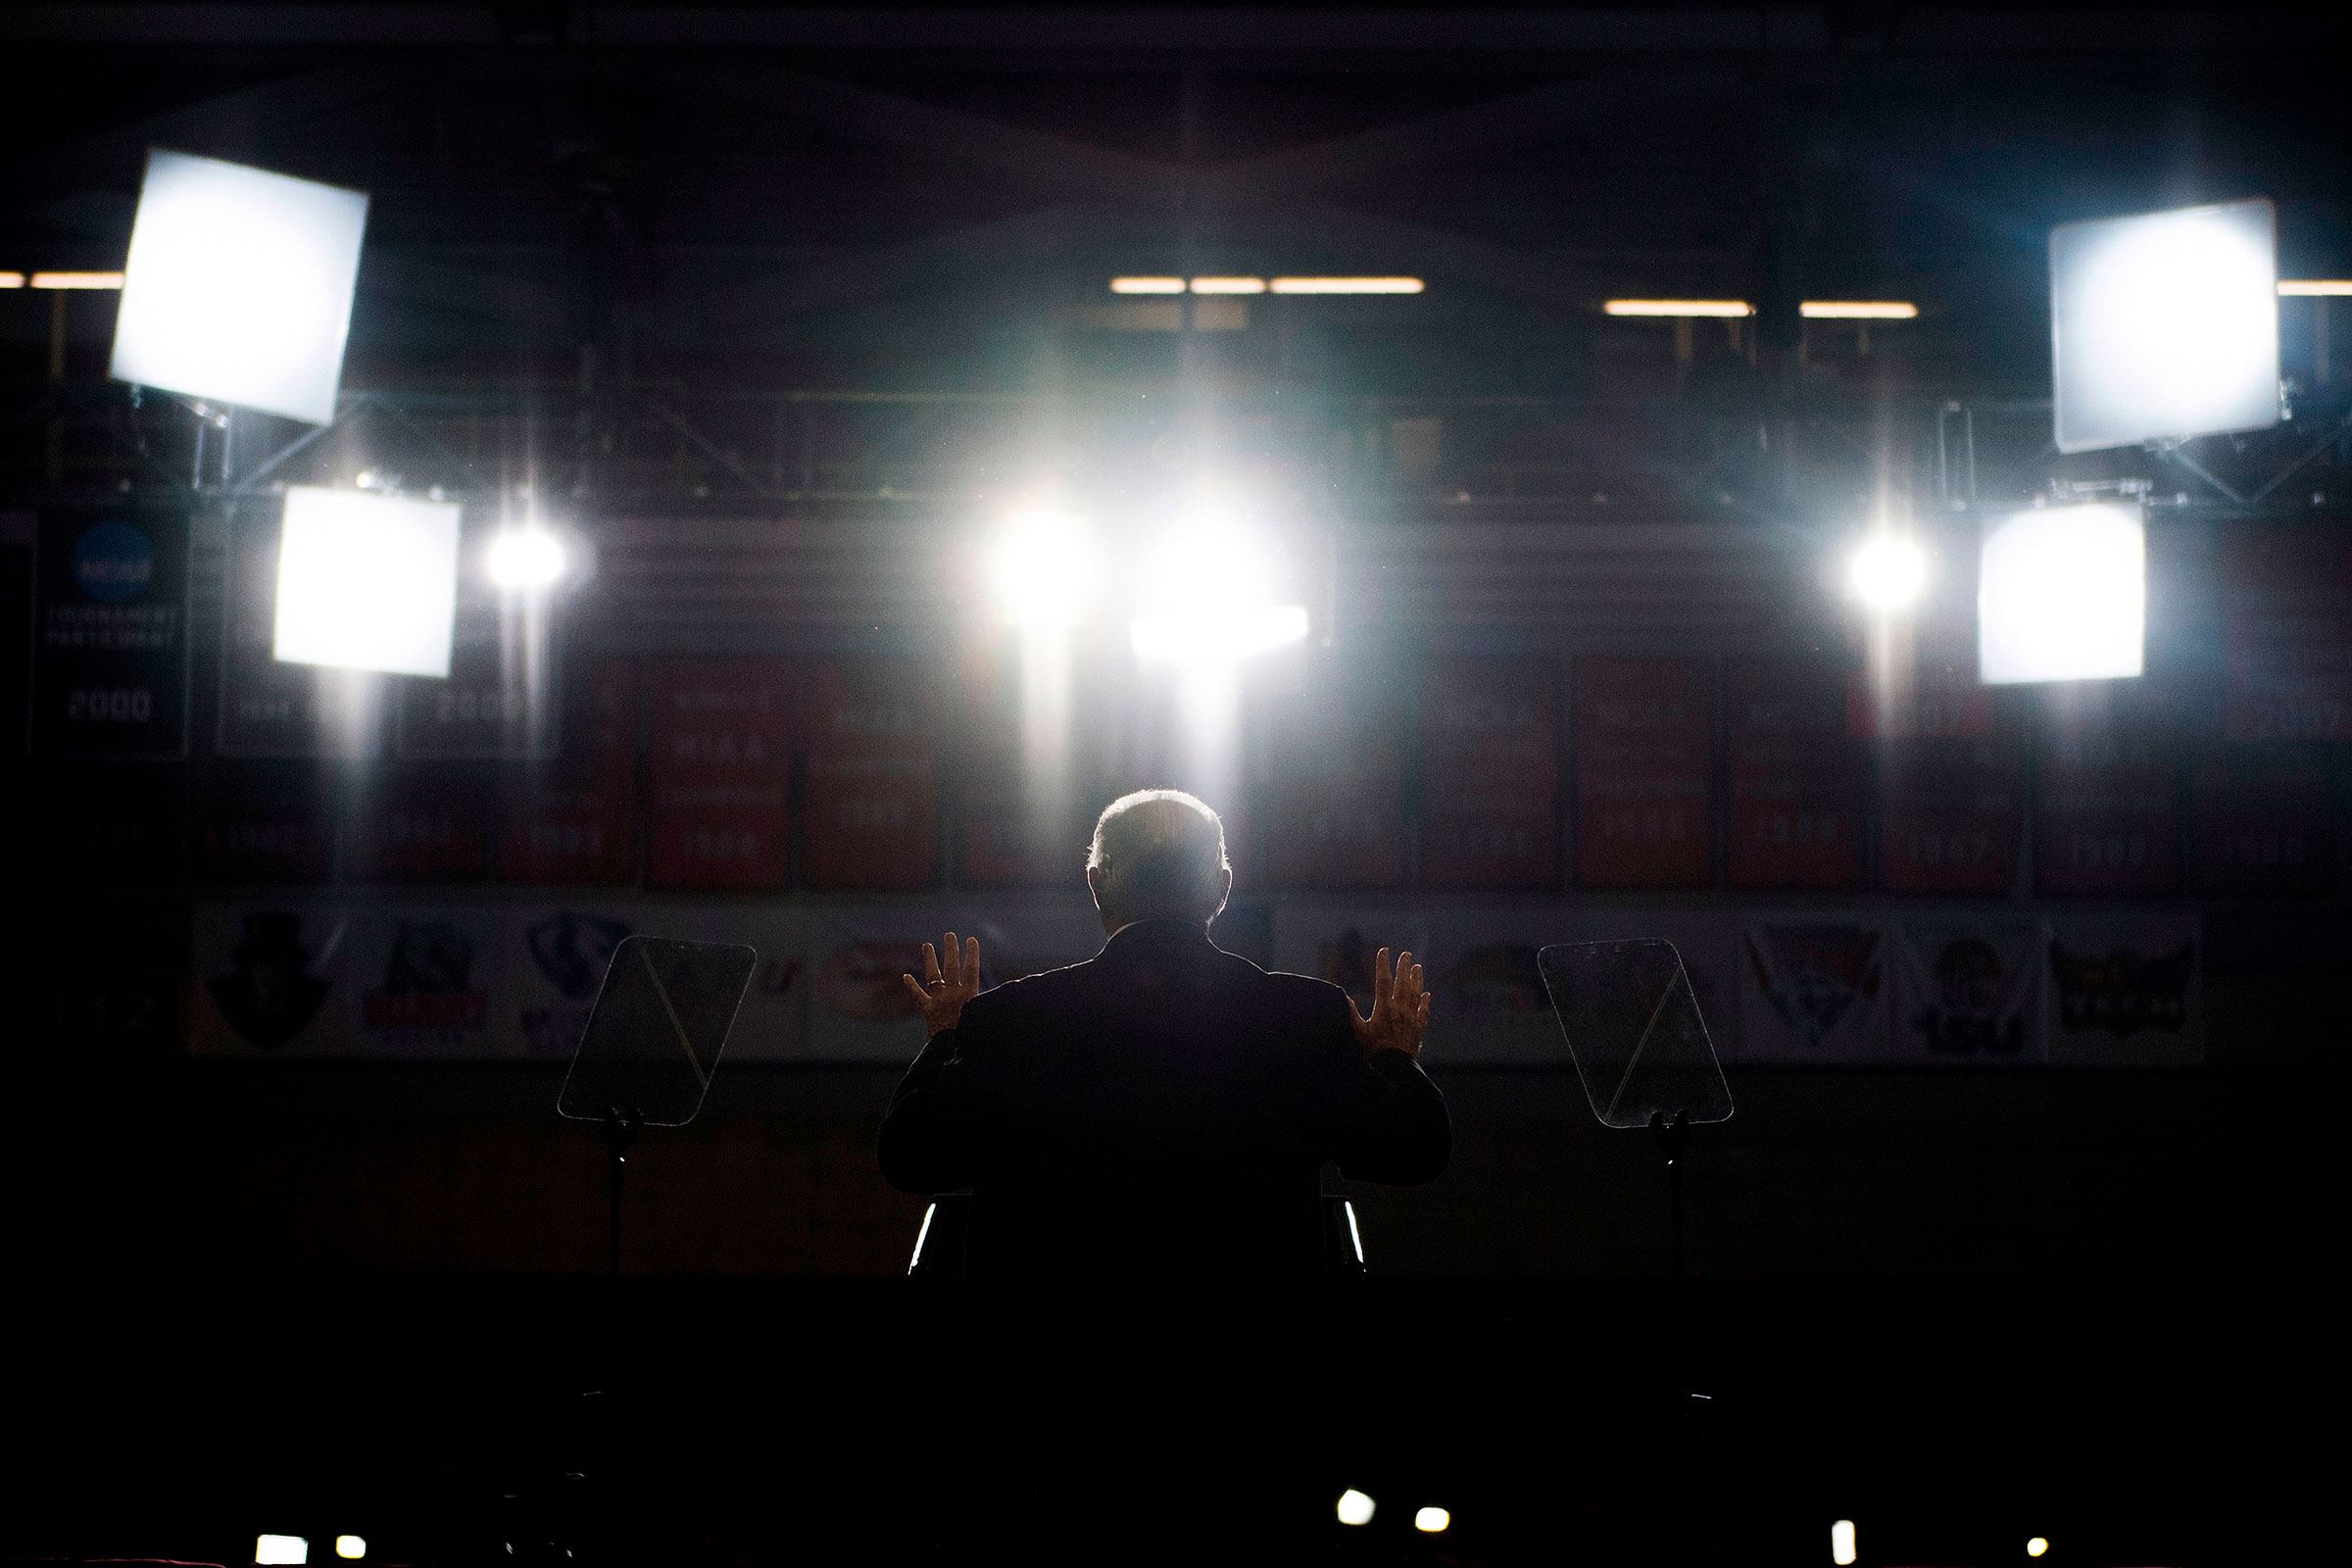 Limbaugh speaks at a Make America Great Again rally in Cape Girardeau, Mo. on Nov. 5, 2018. (Jim Watson—AFP/Getty Images)